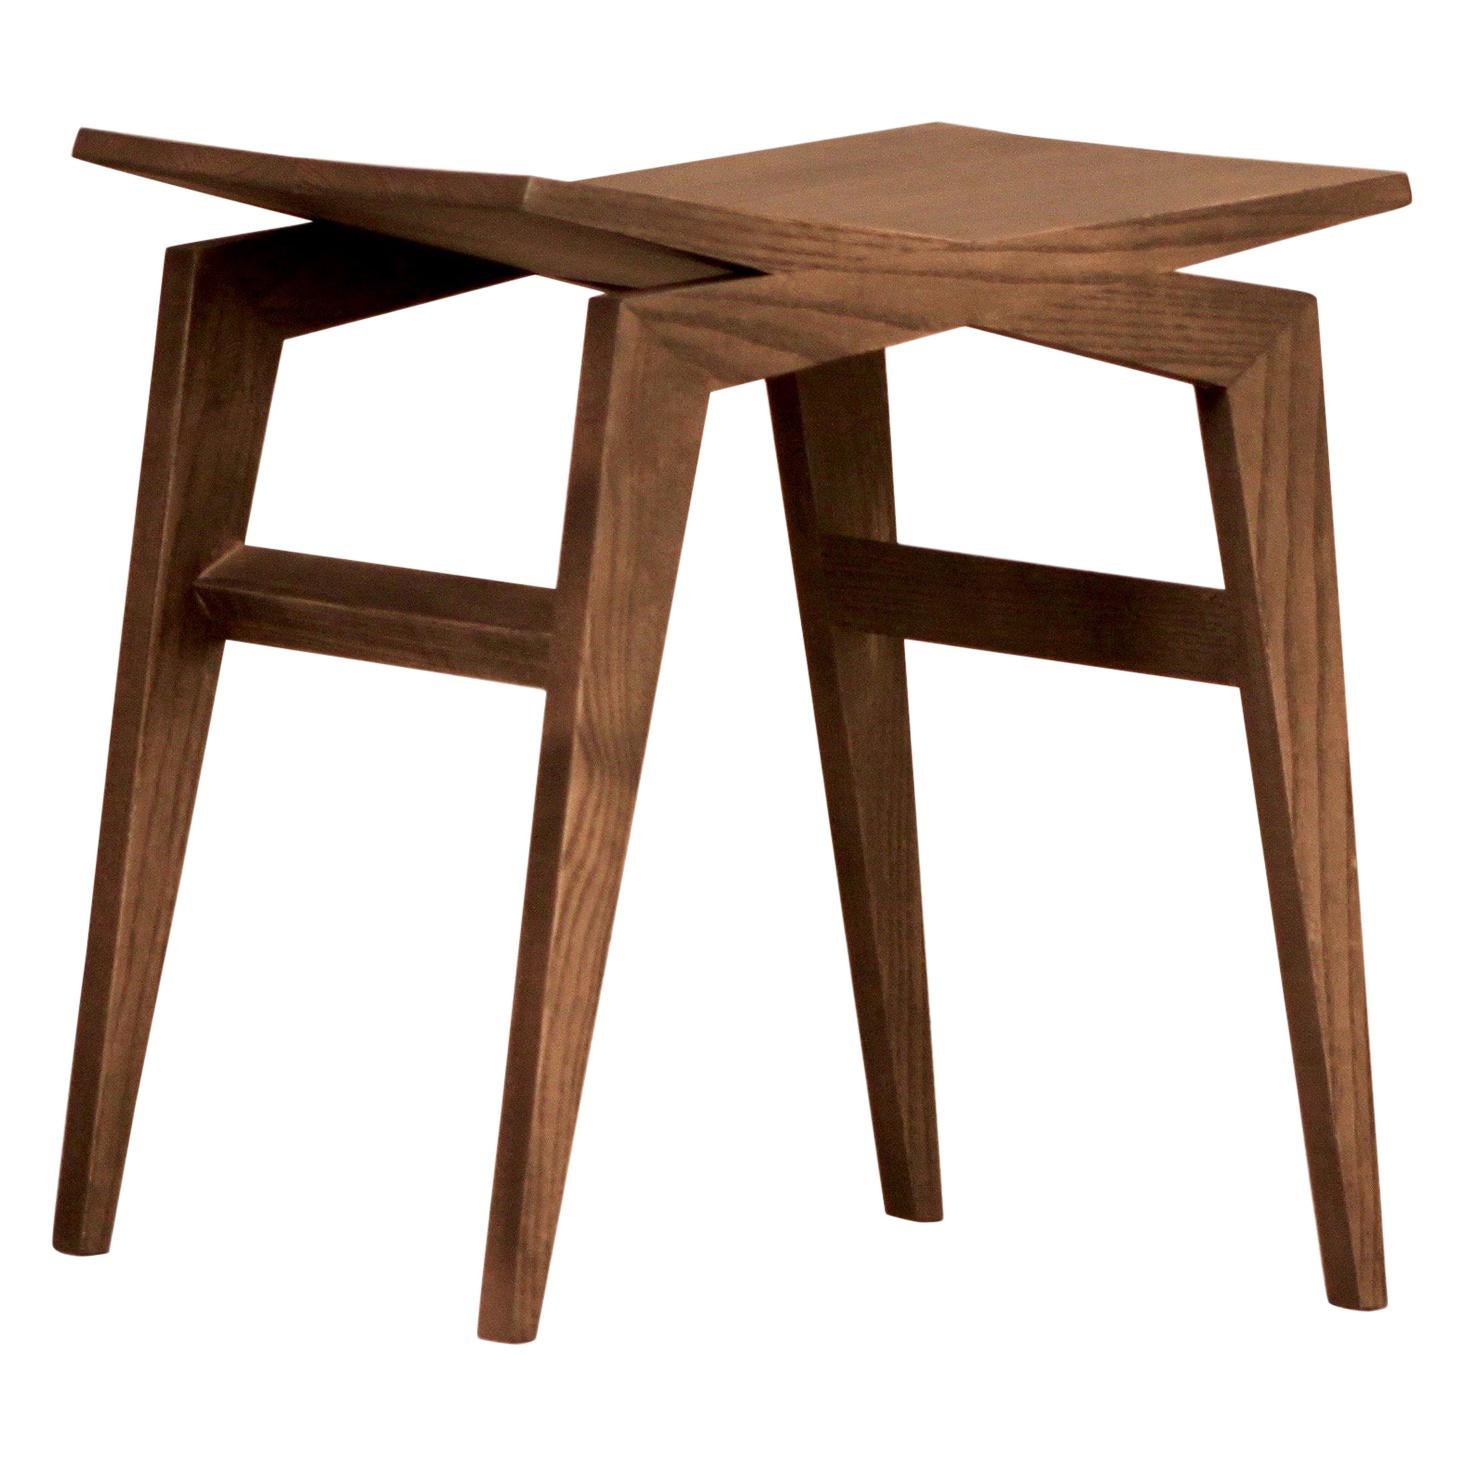 Icaro, Contemporary Low Stool Made of Solid Ashwood